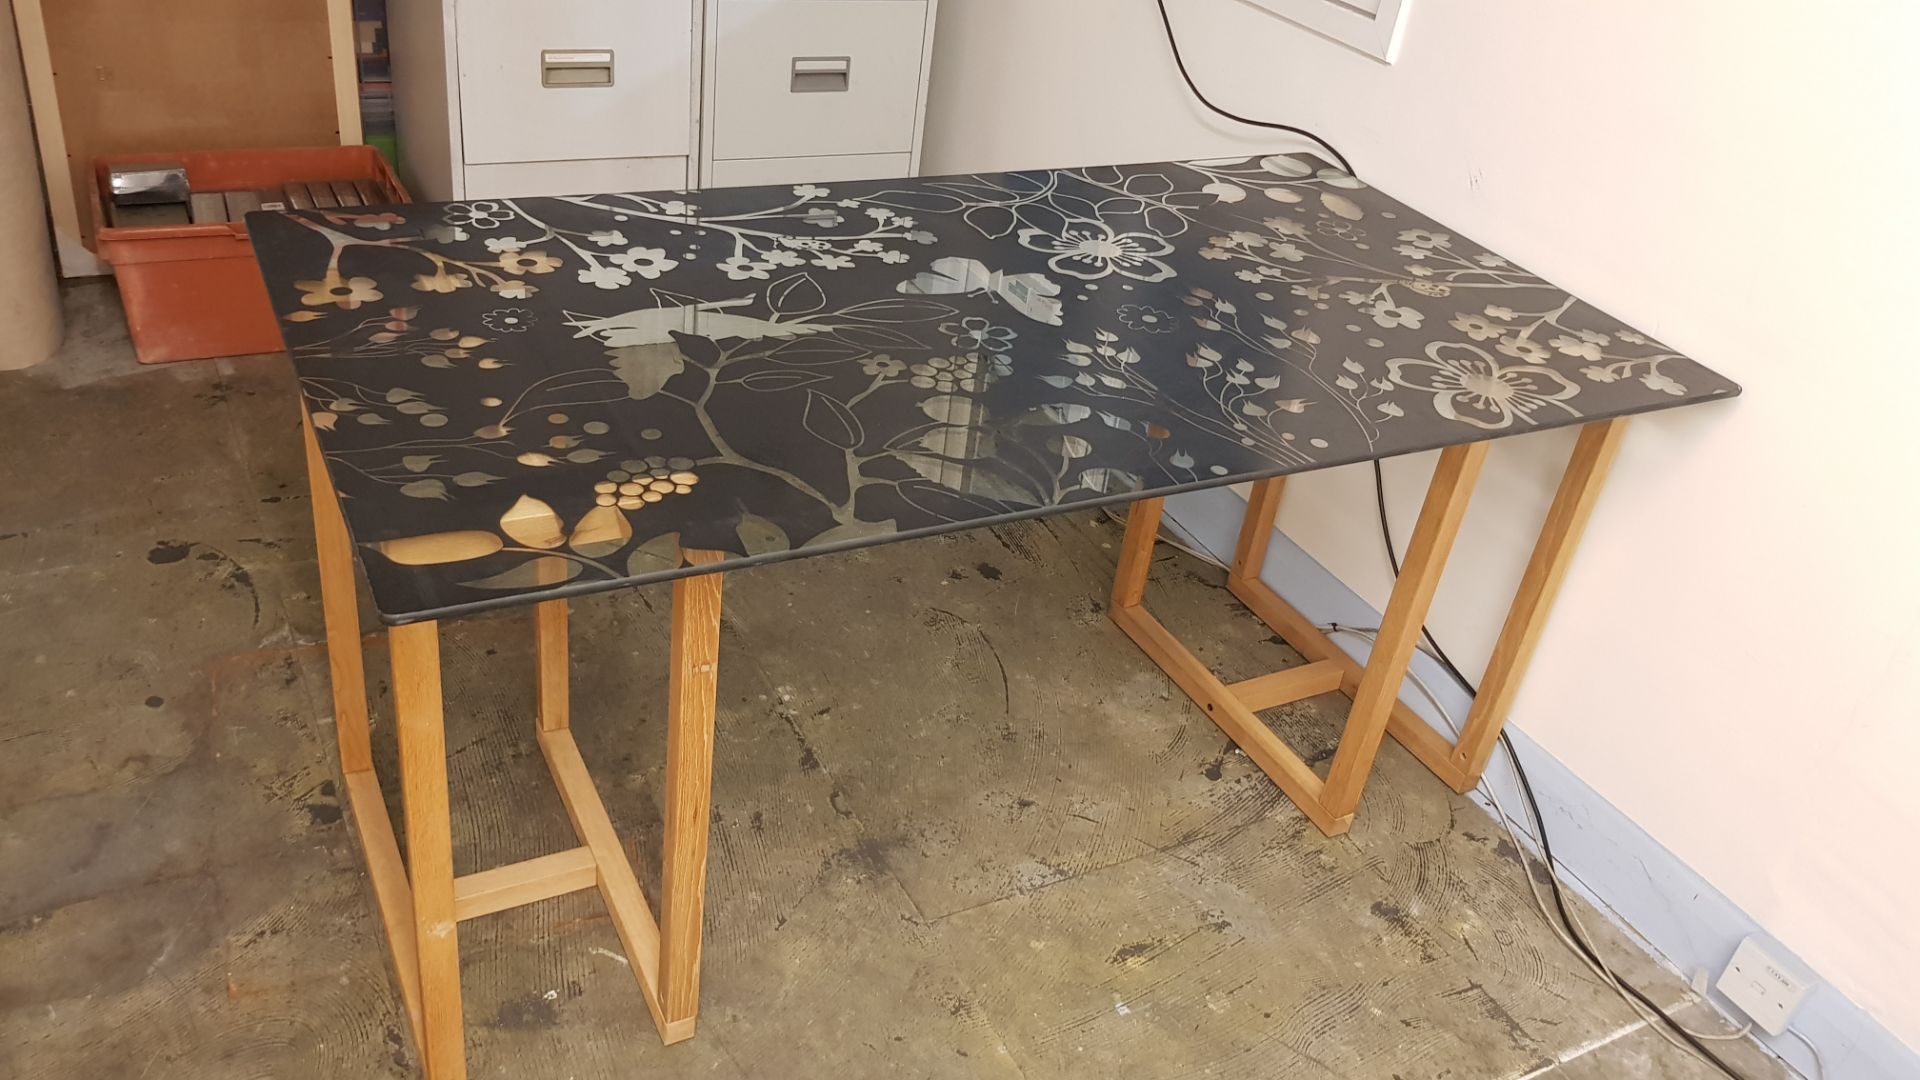 1x Decorative Floral Black Glass Table Top With Wooden Legs. (W150x D80x H72cm)